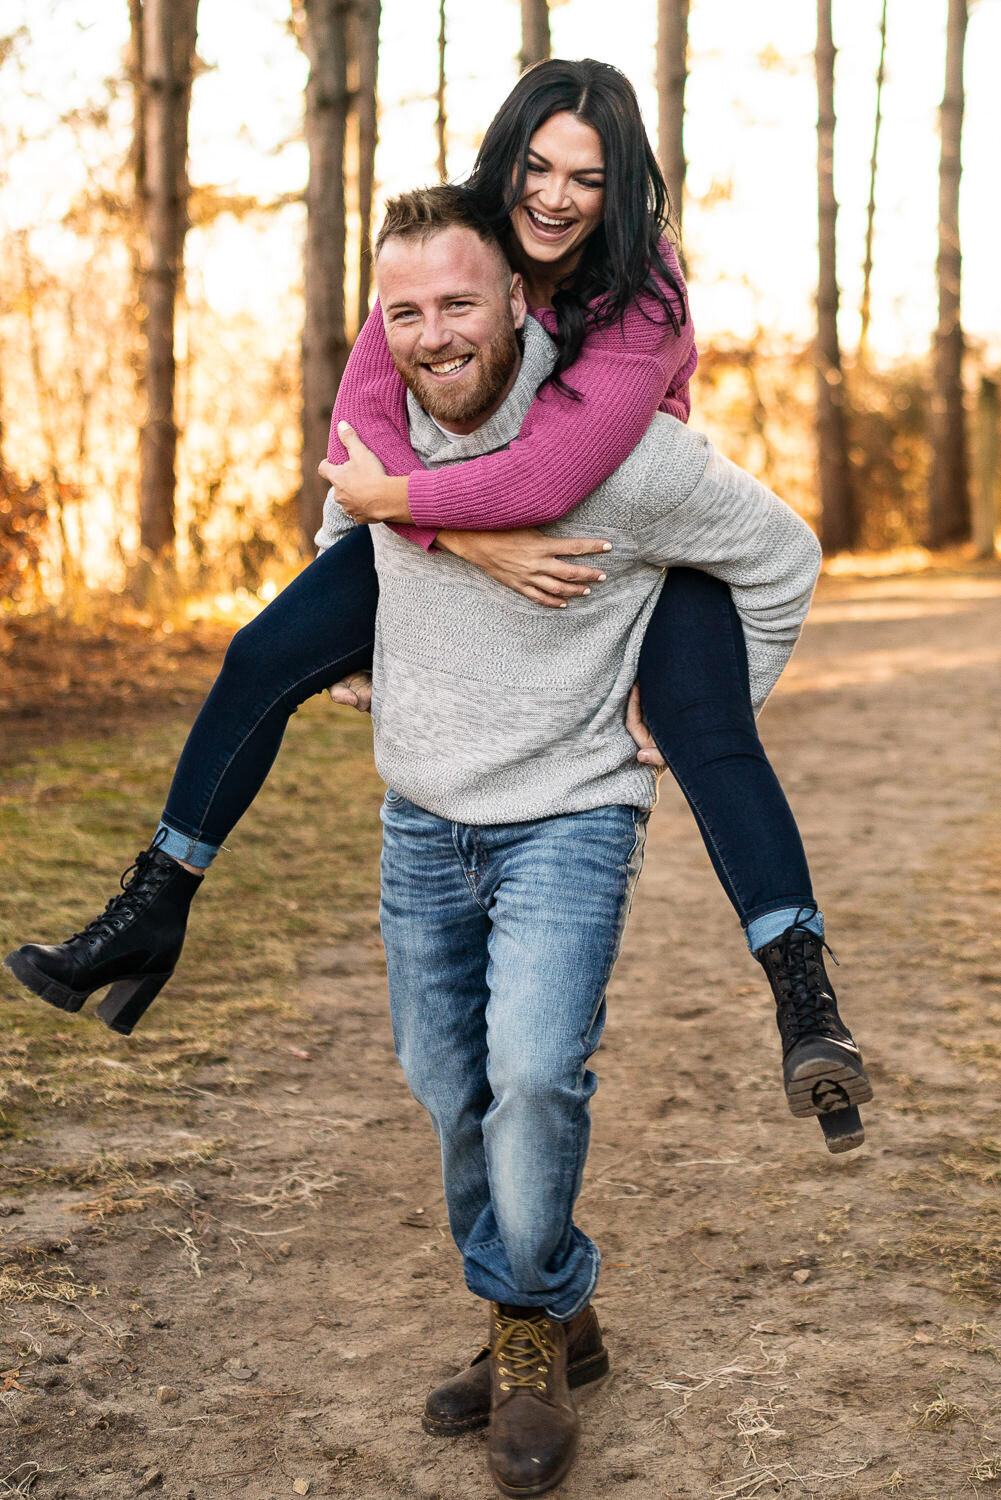 Man carries woman in pink shirt and jeans on his back.